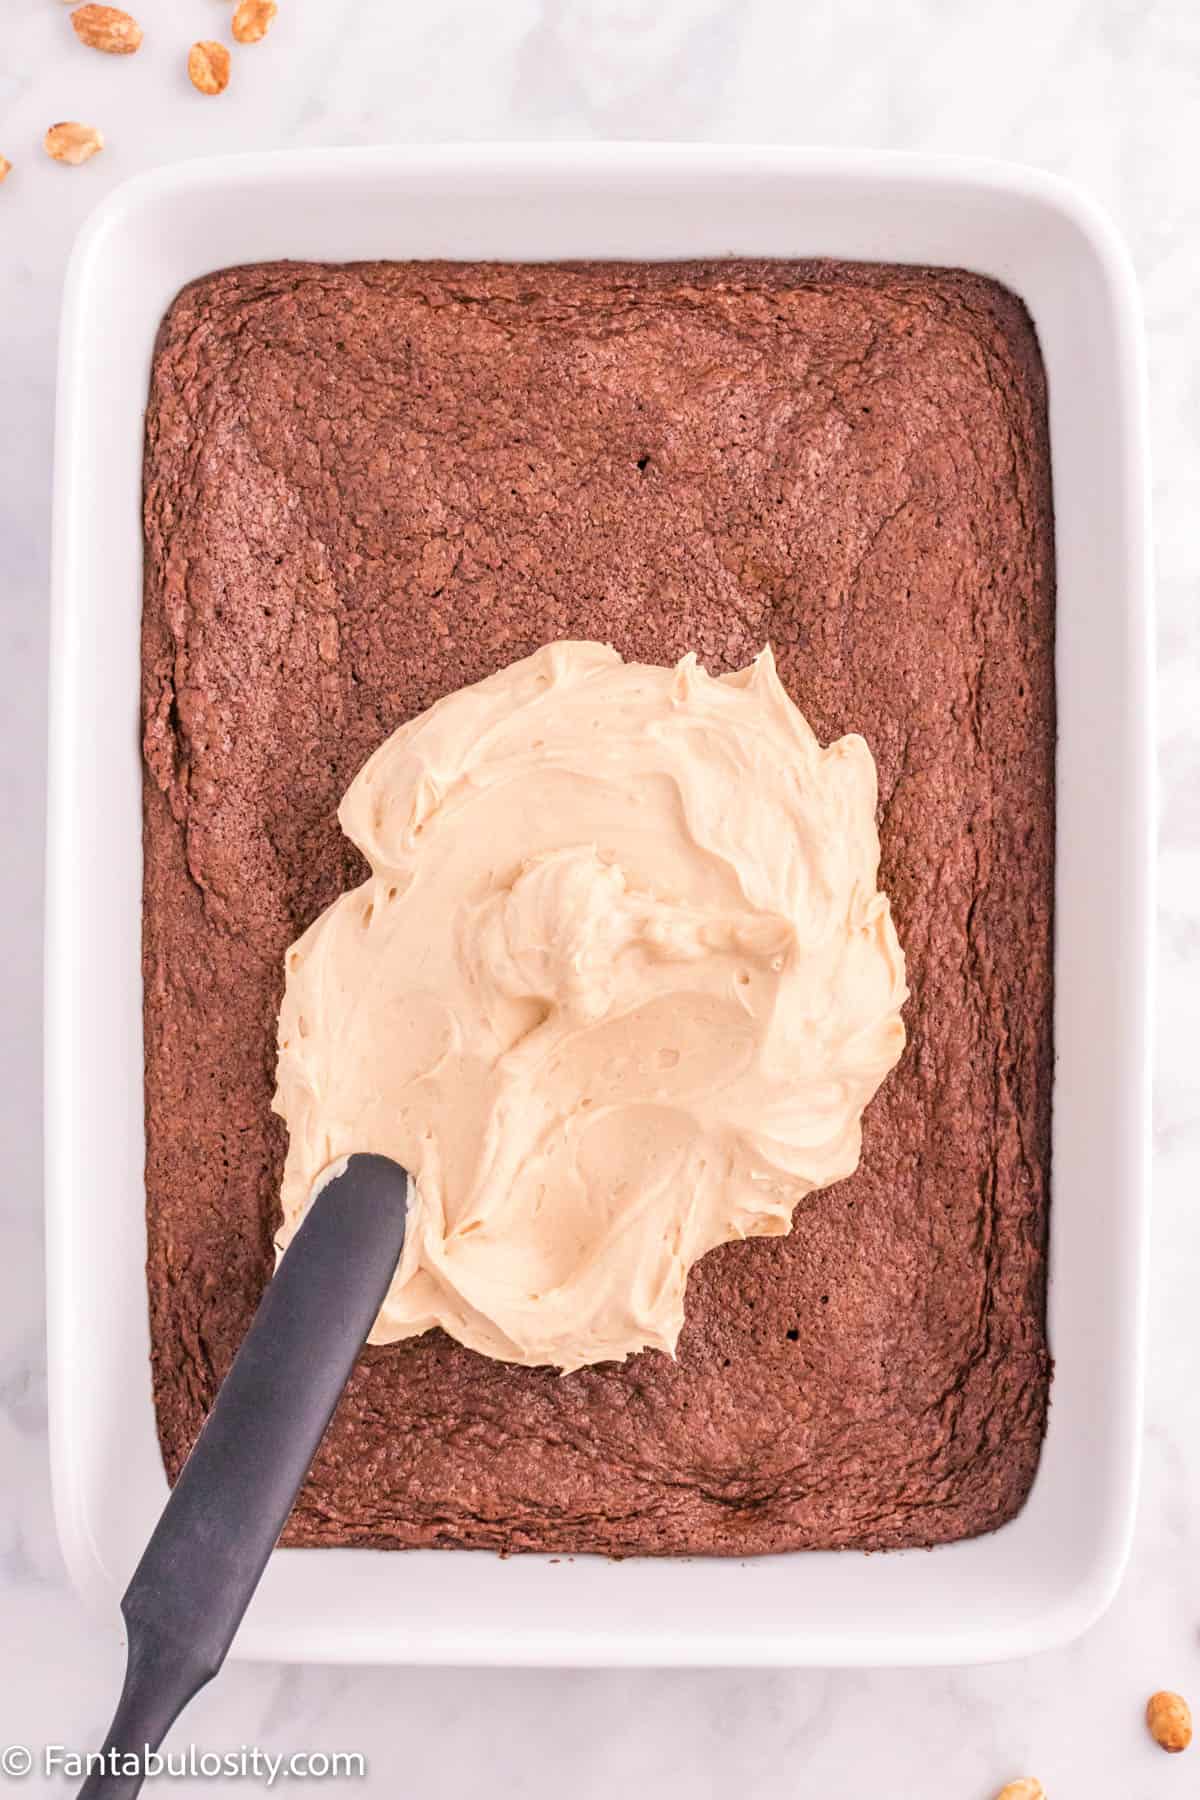 Peanut butter frosting being spread on baked brownies.